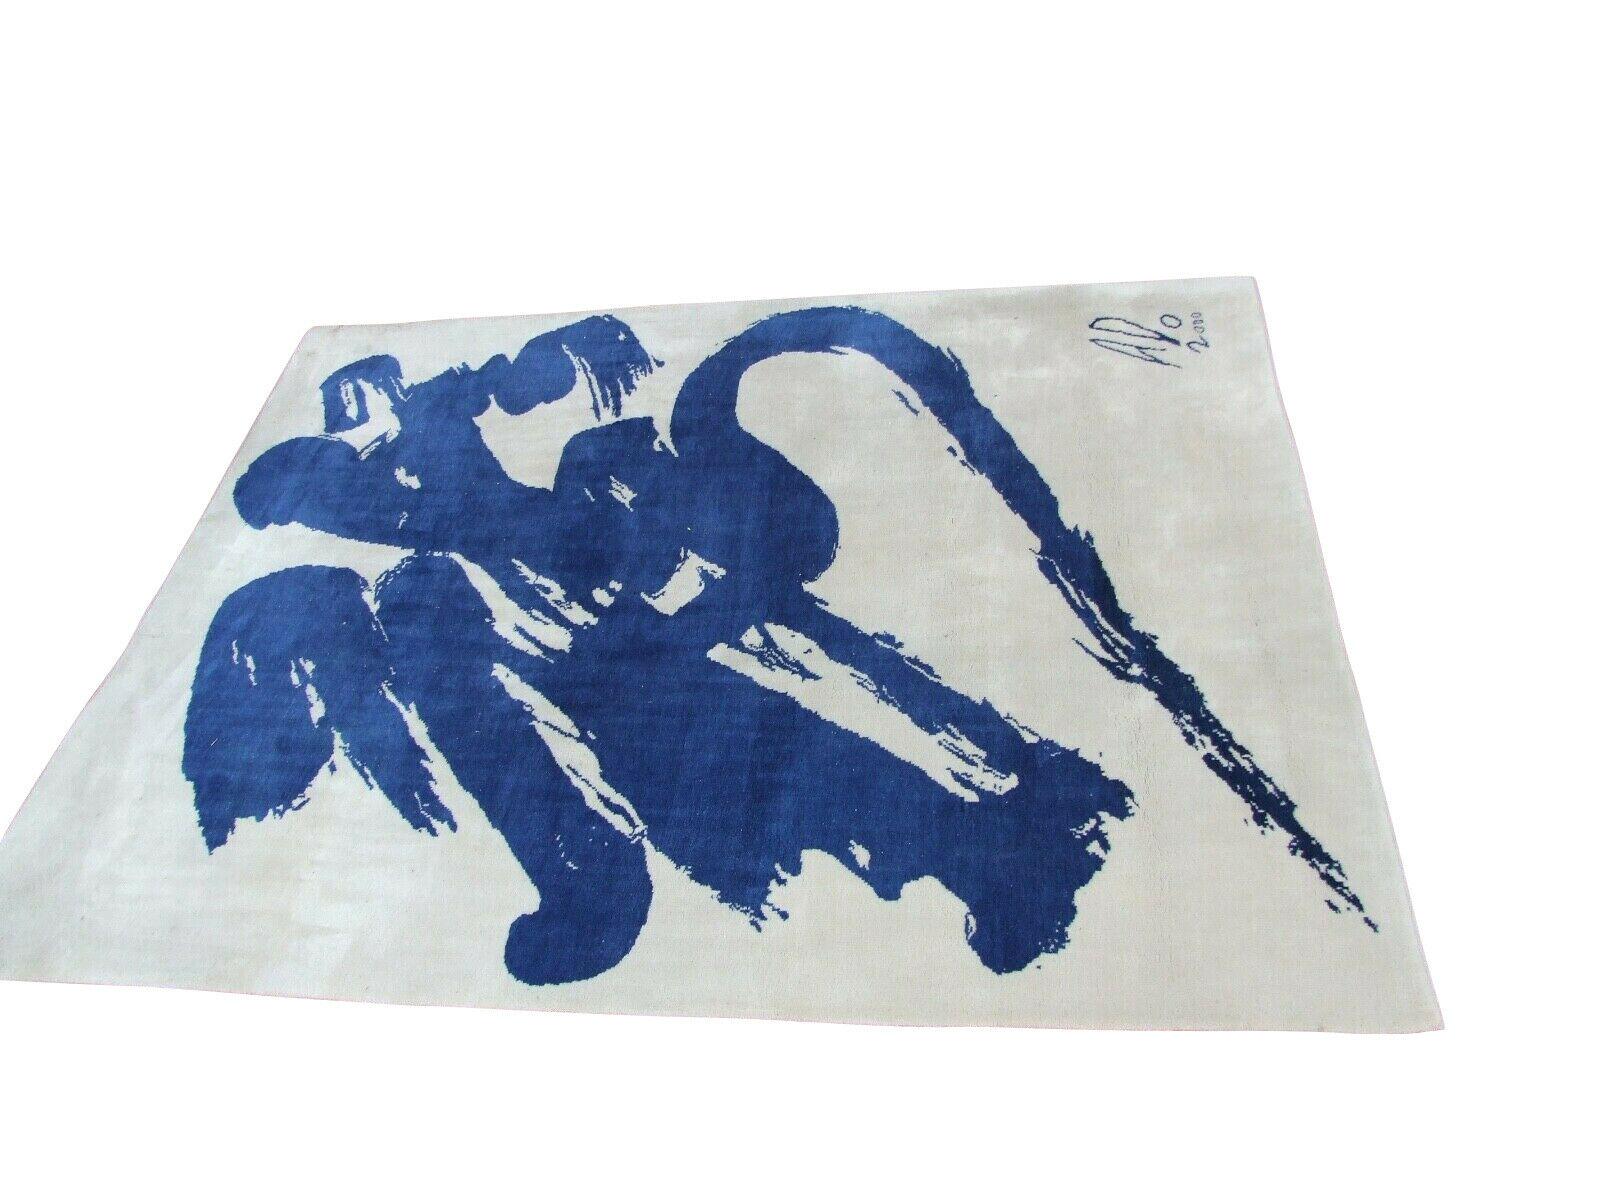 This rug is a rare edition by renewed British artist Antony Donaldson. He had only ever had 10 of these rugs ever made and one has not been on the market available for sale before now. 
 
The rugs were handmade in the year 2000 in the Himalayans